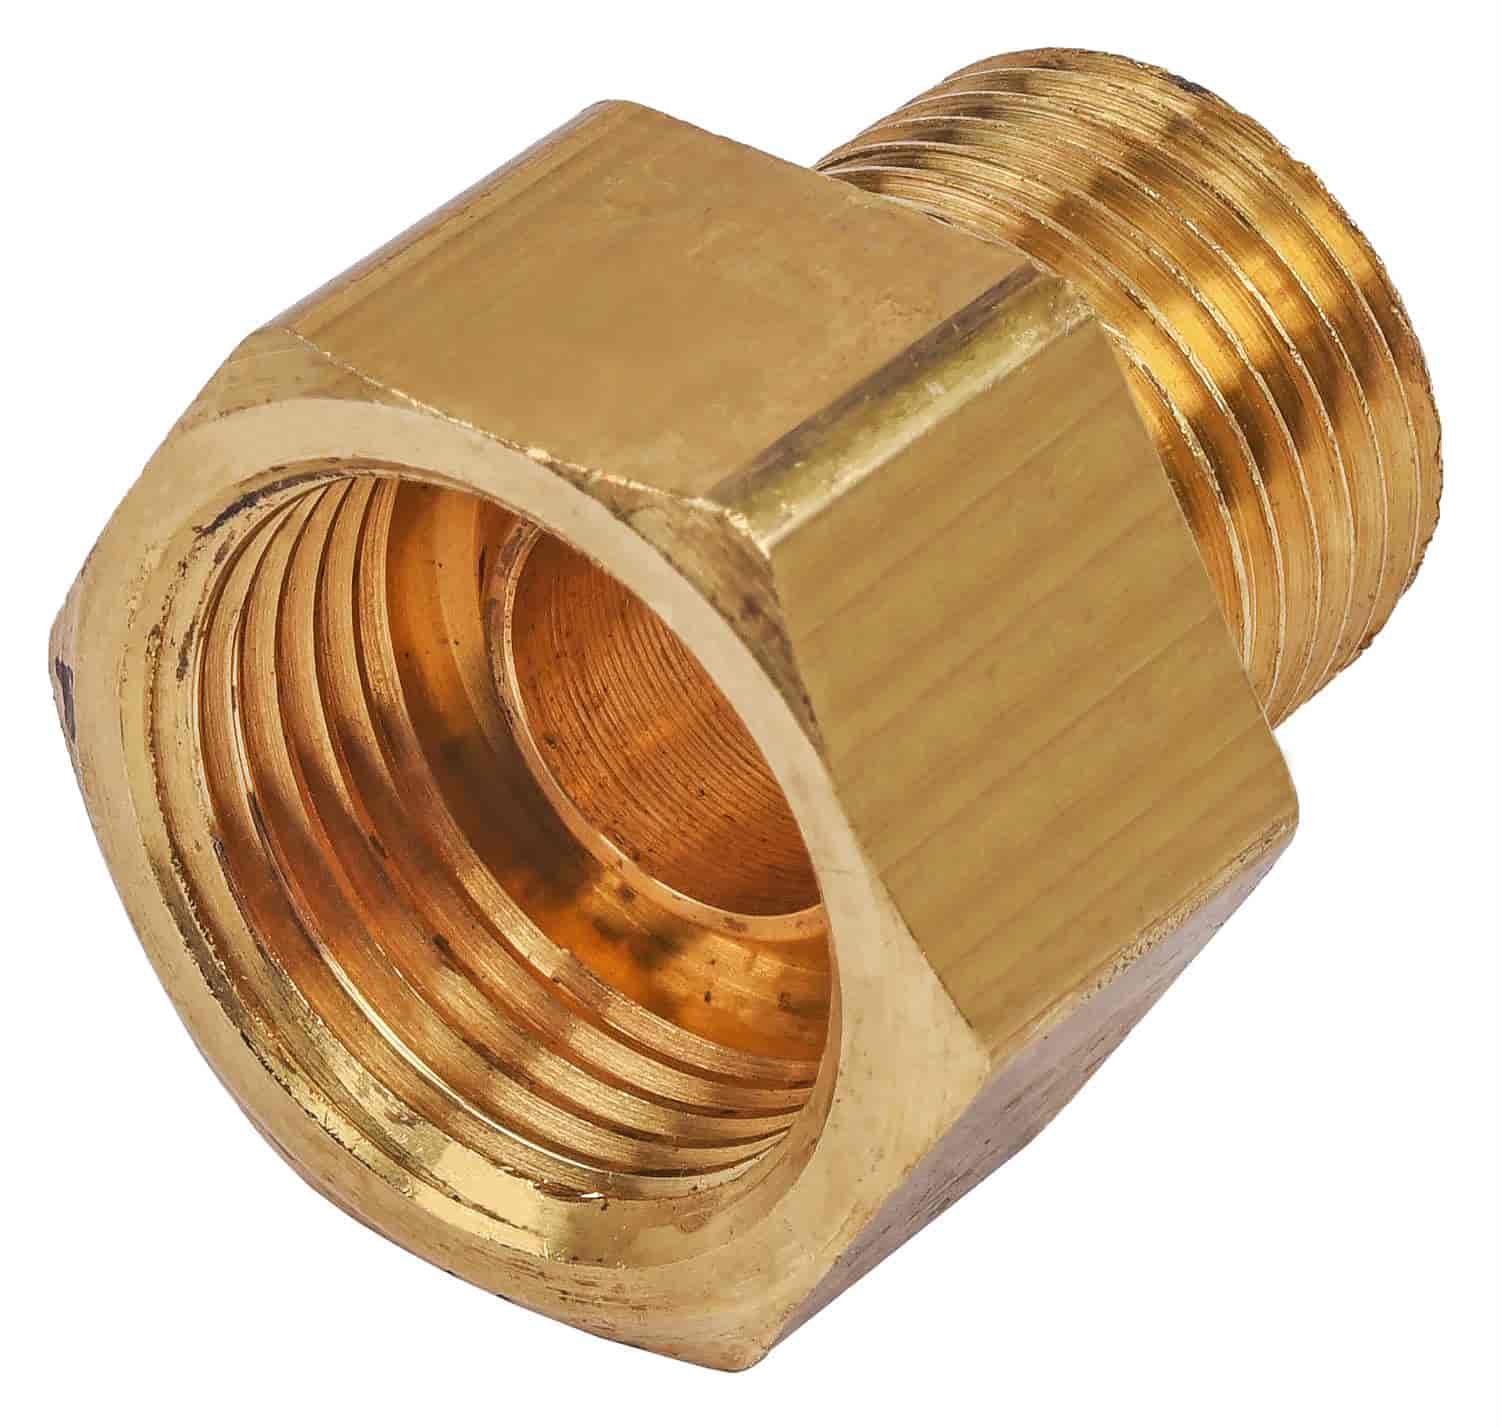 Brass Lead Free 3/8 Compression X 1/4 Female Flare Adapter